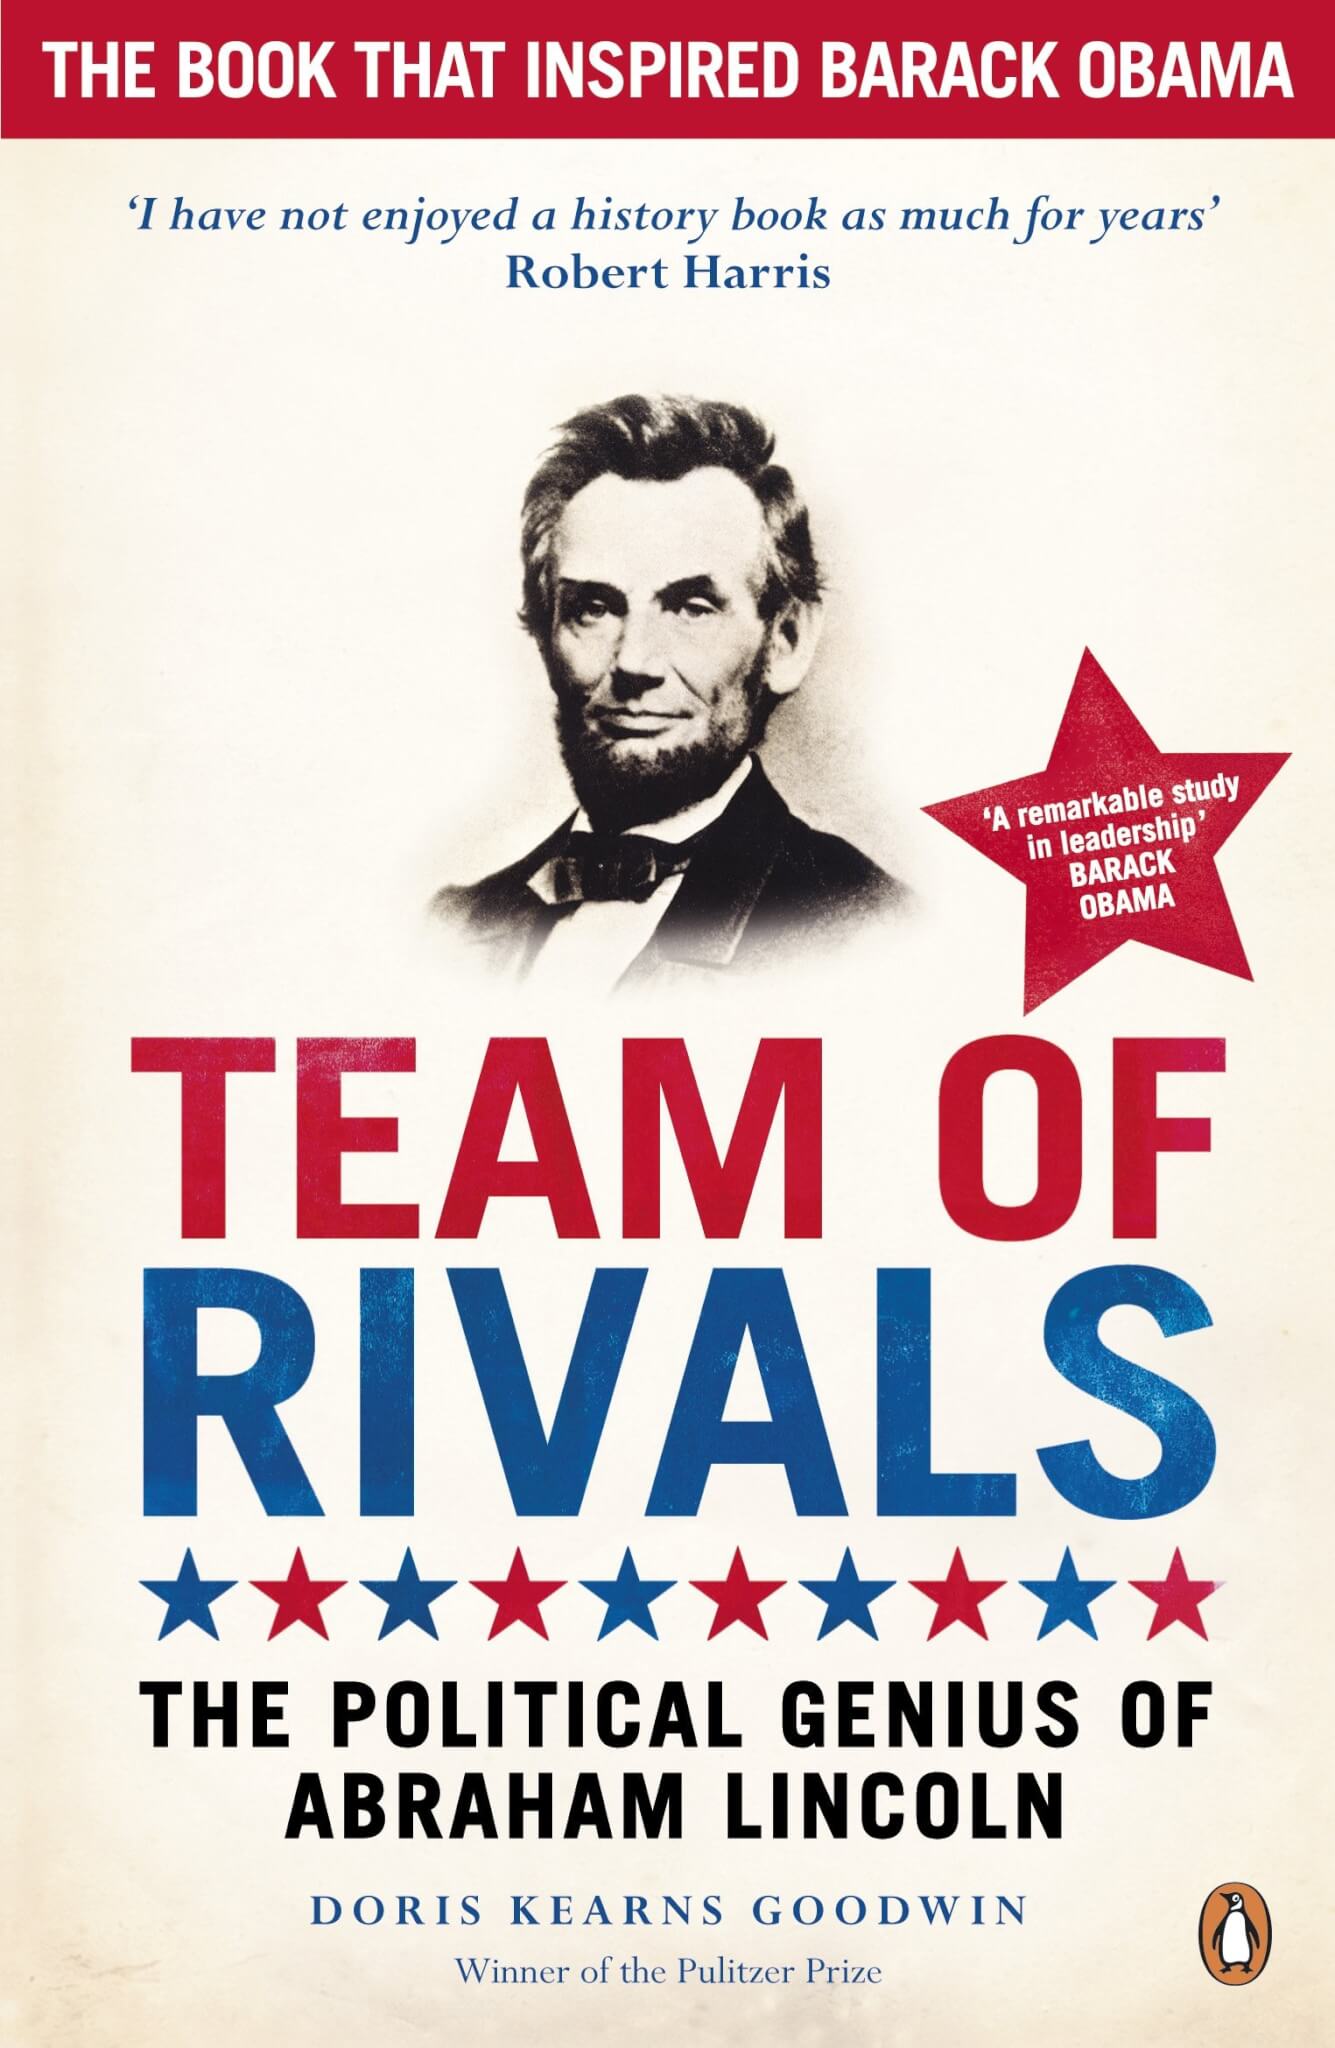 "Team of Rivals: The Political Genius of Abraham Lincoln" by Doris Kearns Goodwin